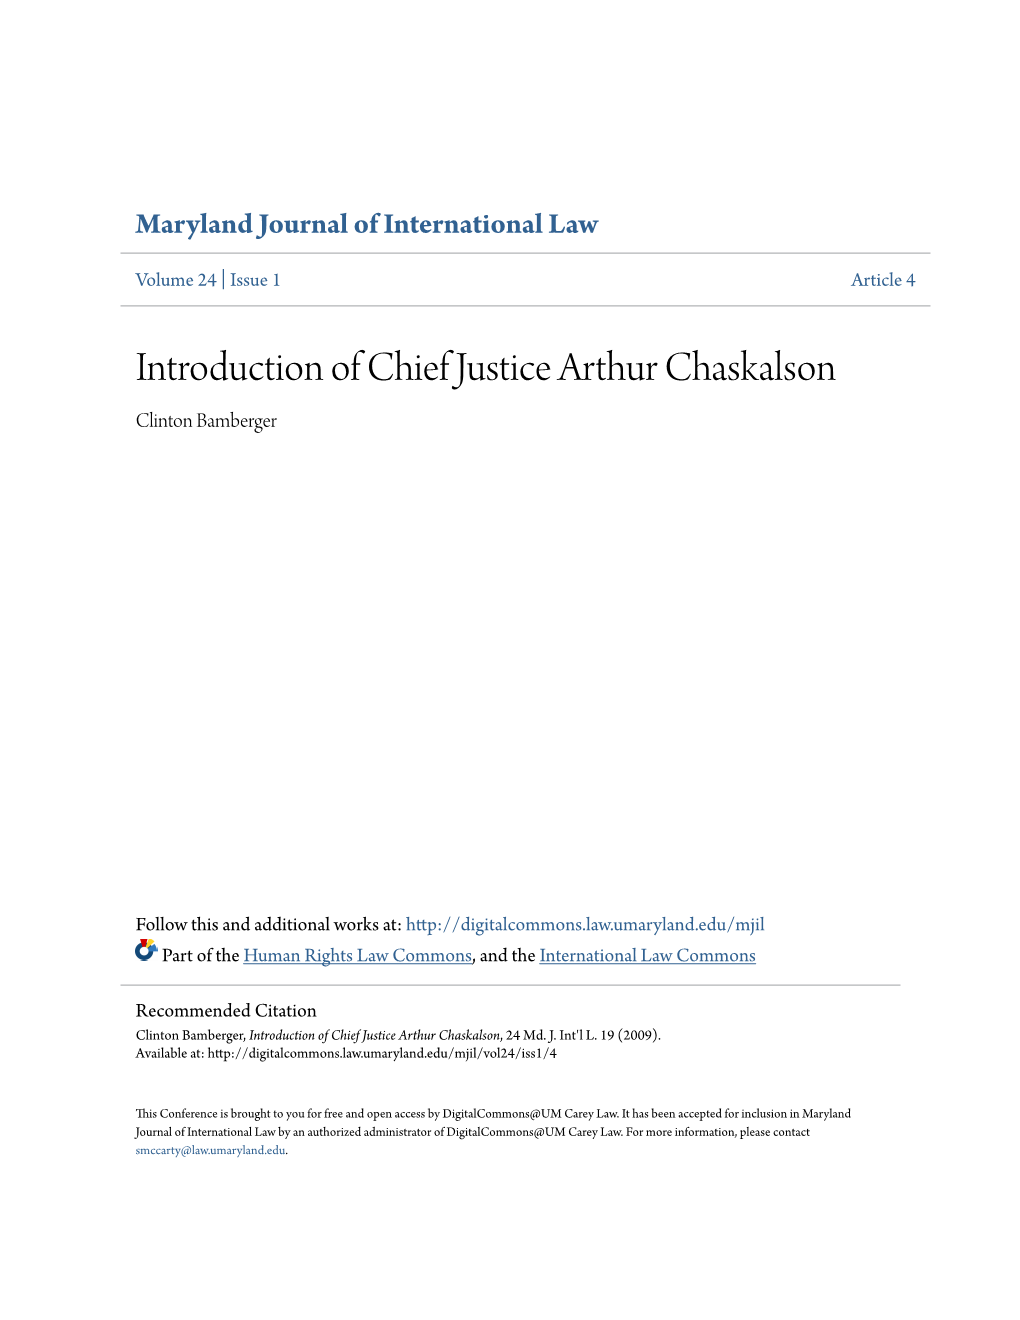 Introduction of Chief Justice Arthur Chaskalson Clinton Bamberger